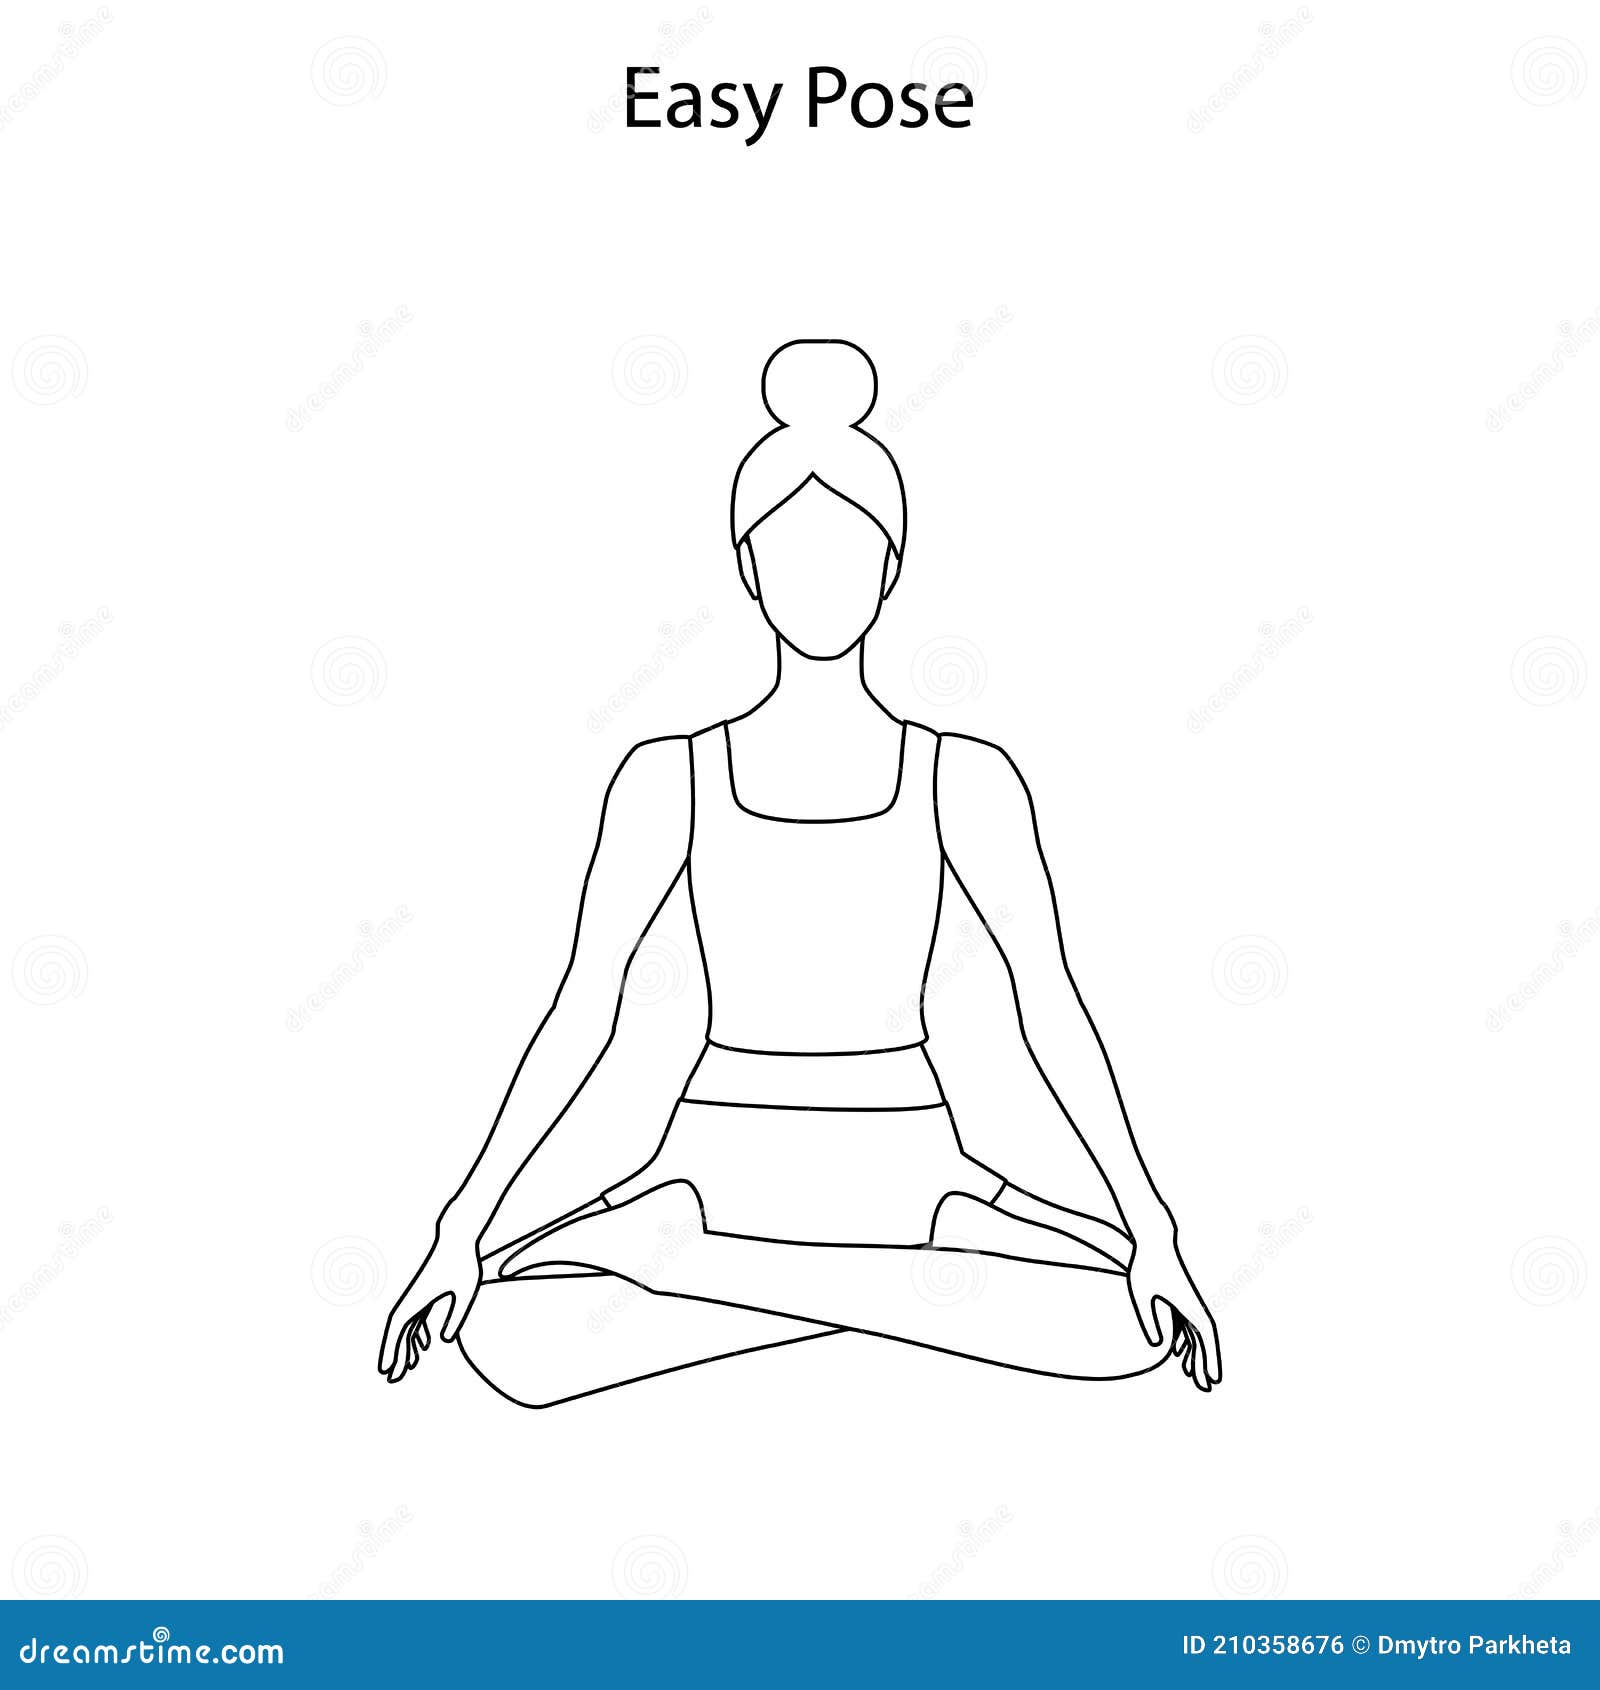 Selfdrawing a Simple Animation of One Continuous Exercise of Drawing One  Line a Person Takes Up Yoga a Healthy Lifestyle Stock Vector   Illustration of relax hand 213911934